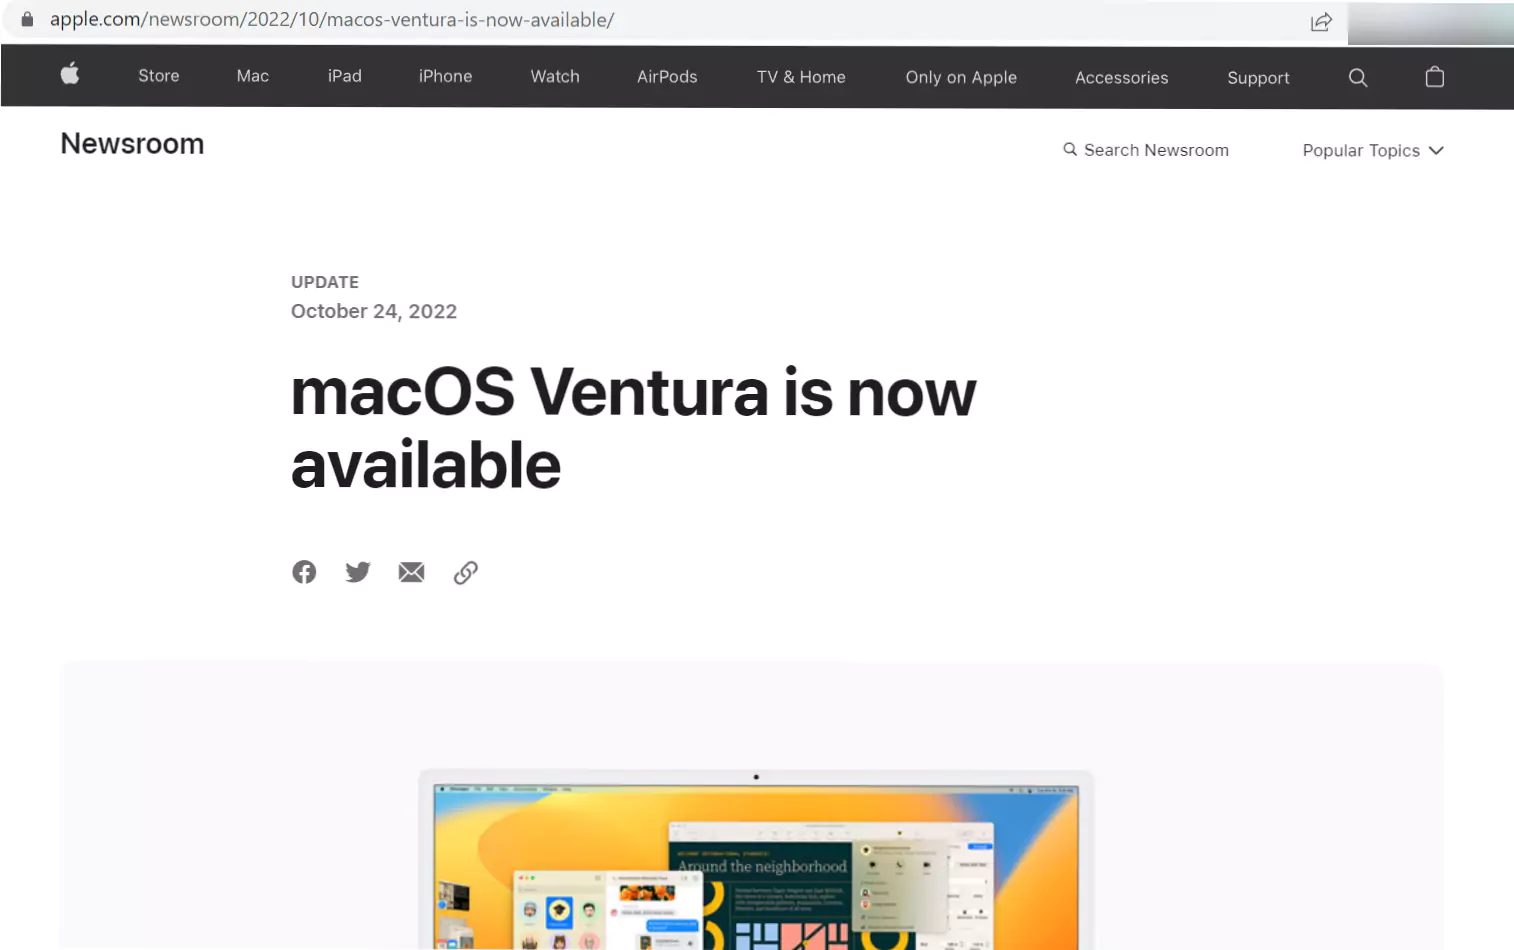 macos-ventura-now-available